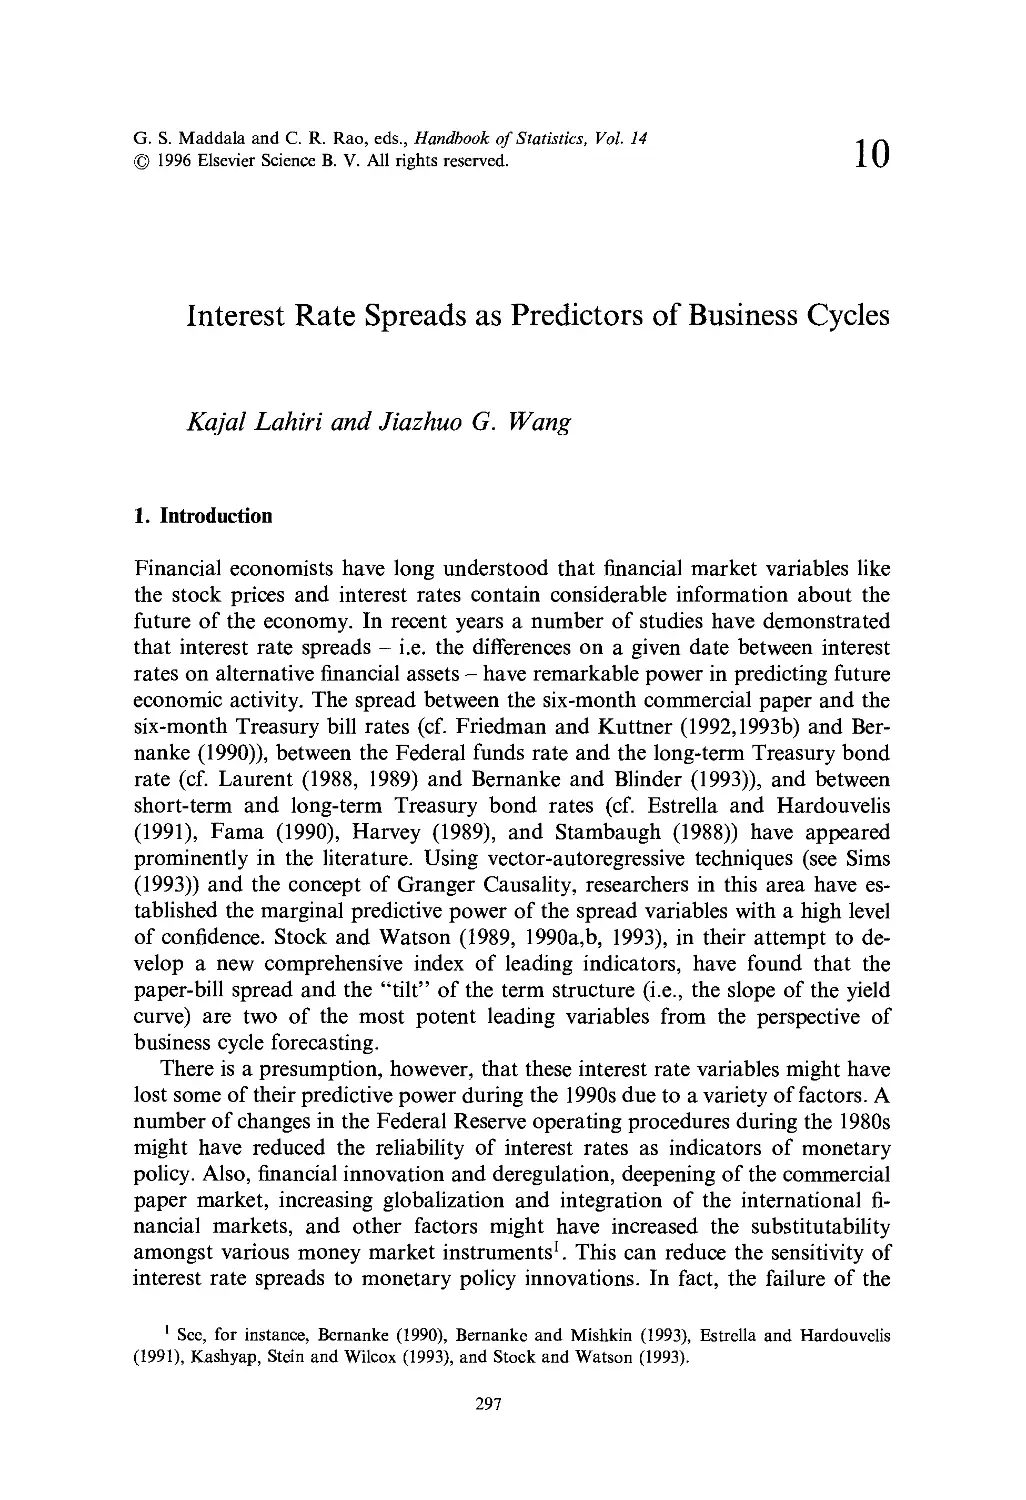 10. Interest Rate Spreads as Predictors of Business Cycles